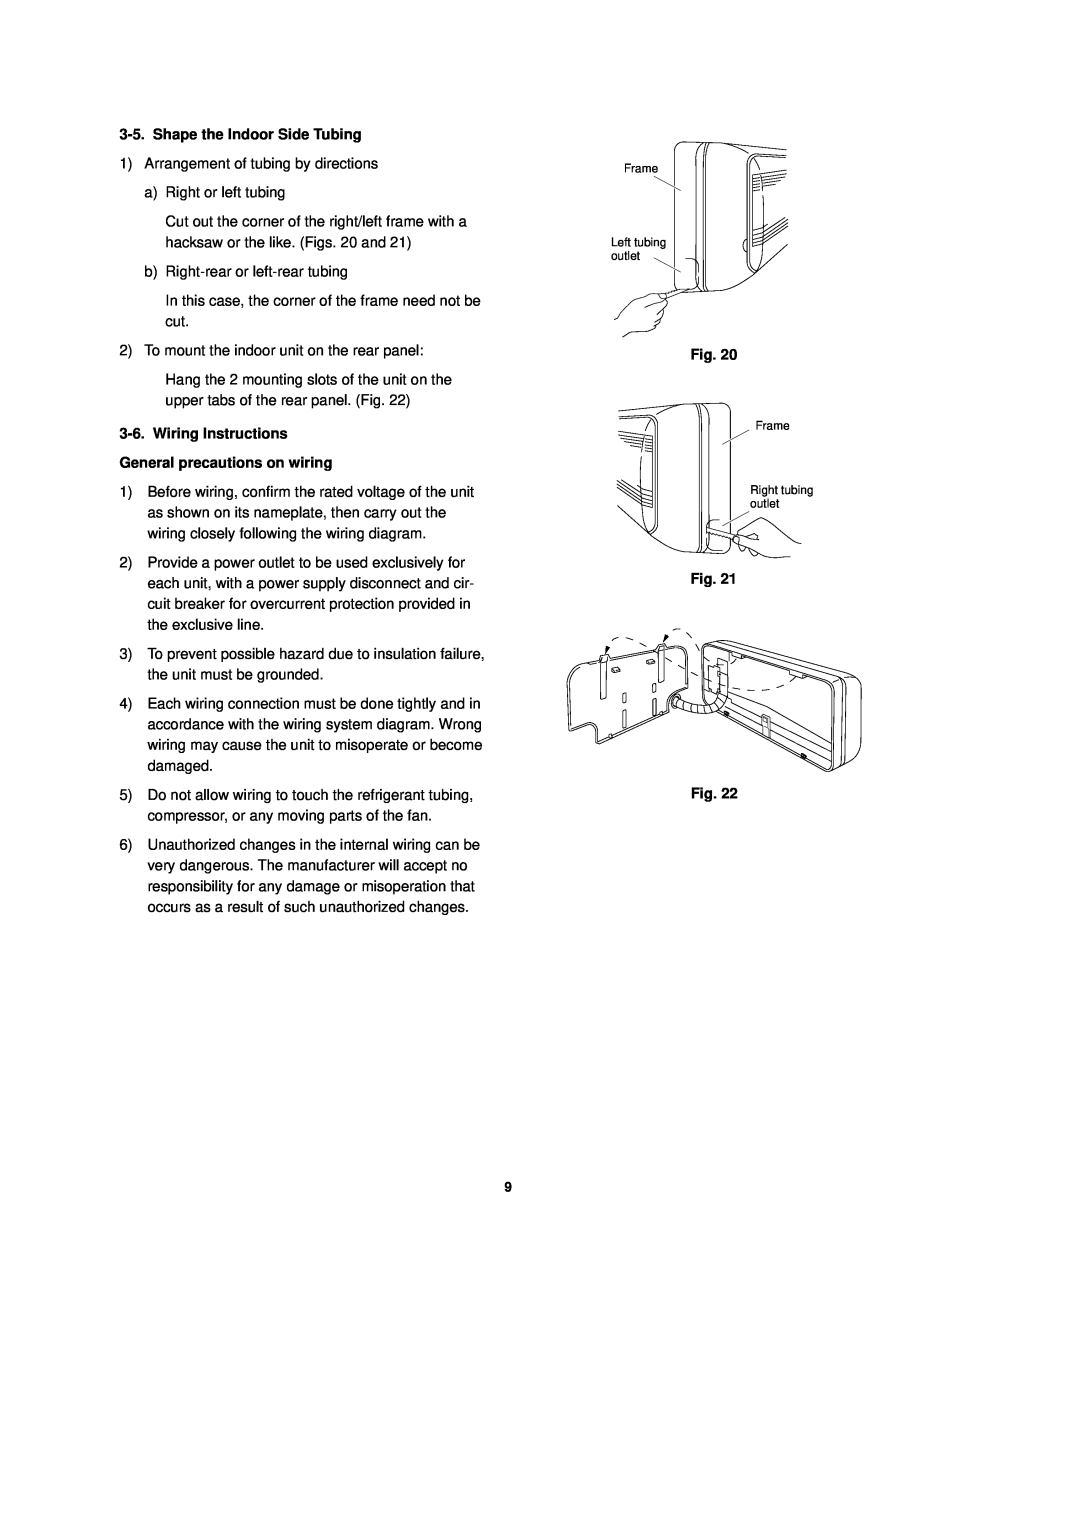 Sanyo CH0951, CH1251 Shape the Indoor Side Tubing, Wiring Instructions, General precautions on wiring, Fig. Fig 